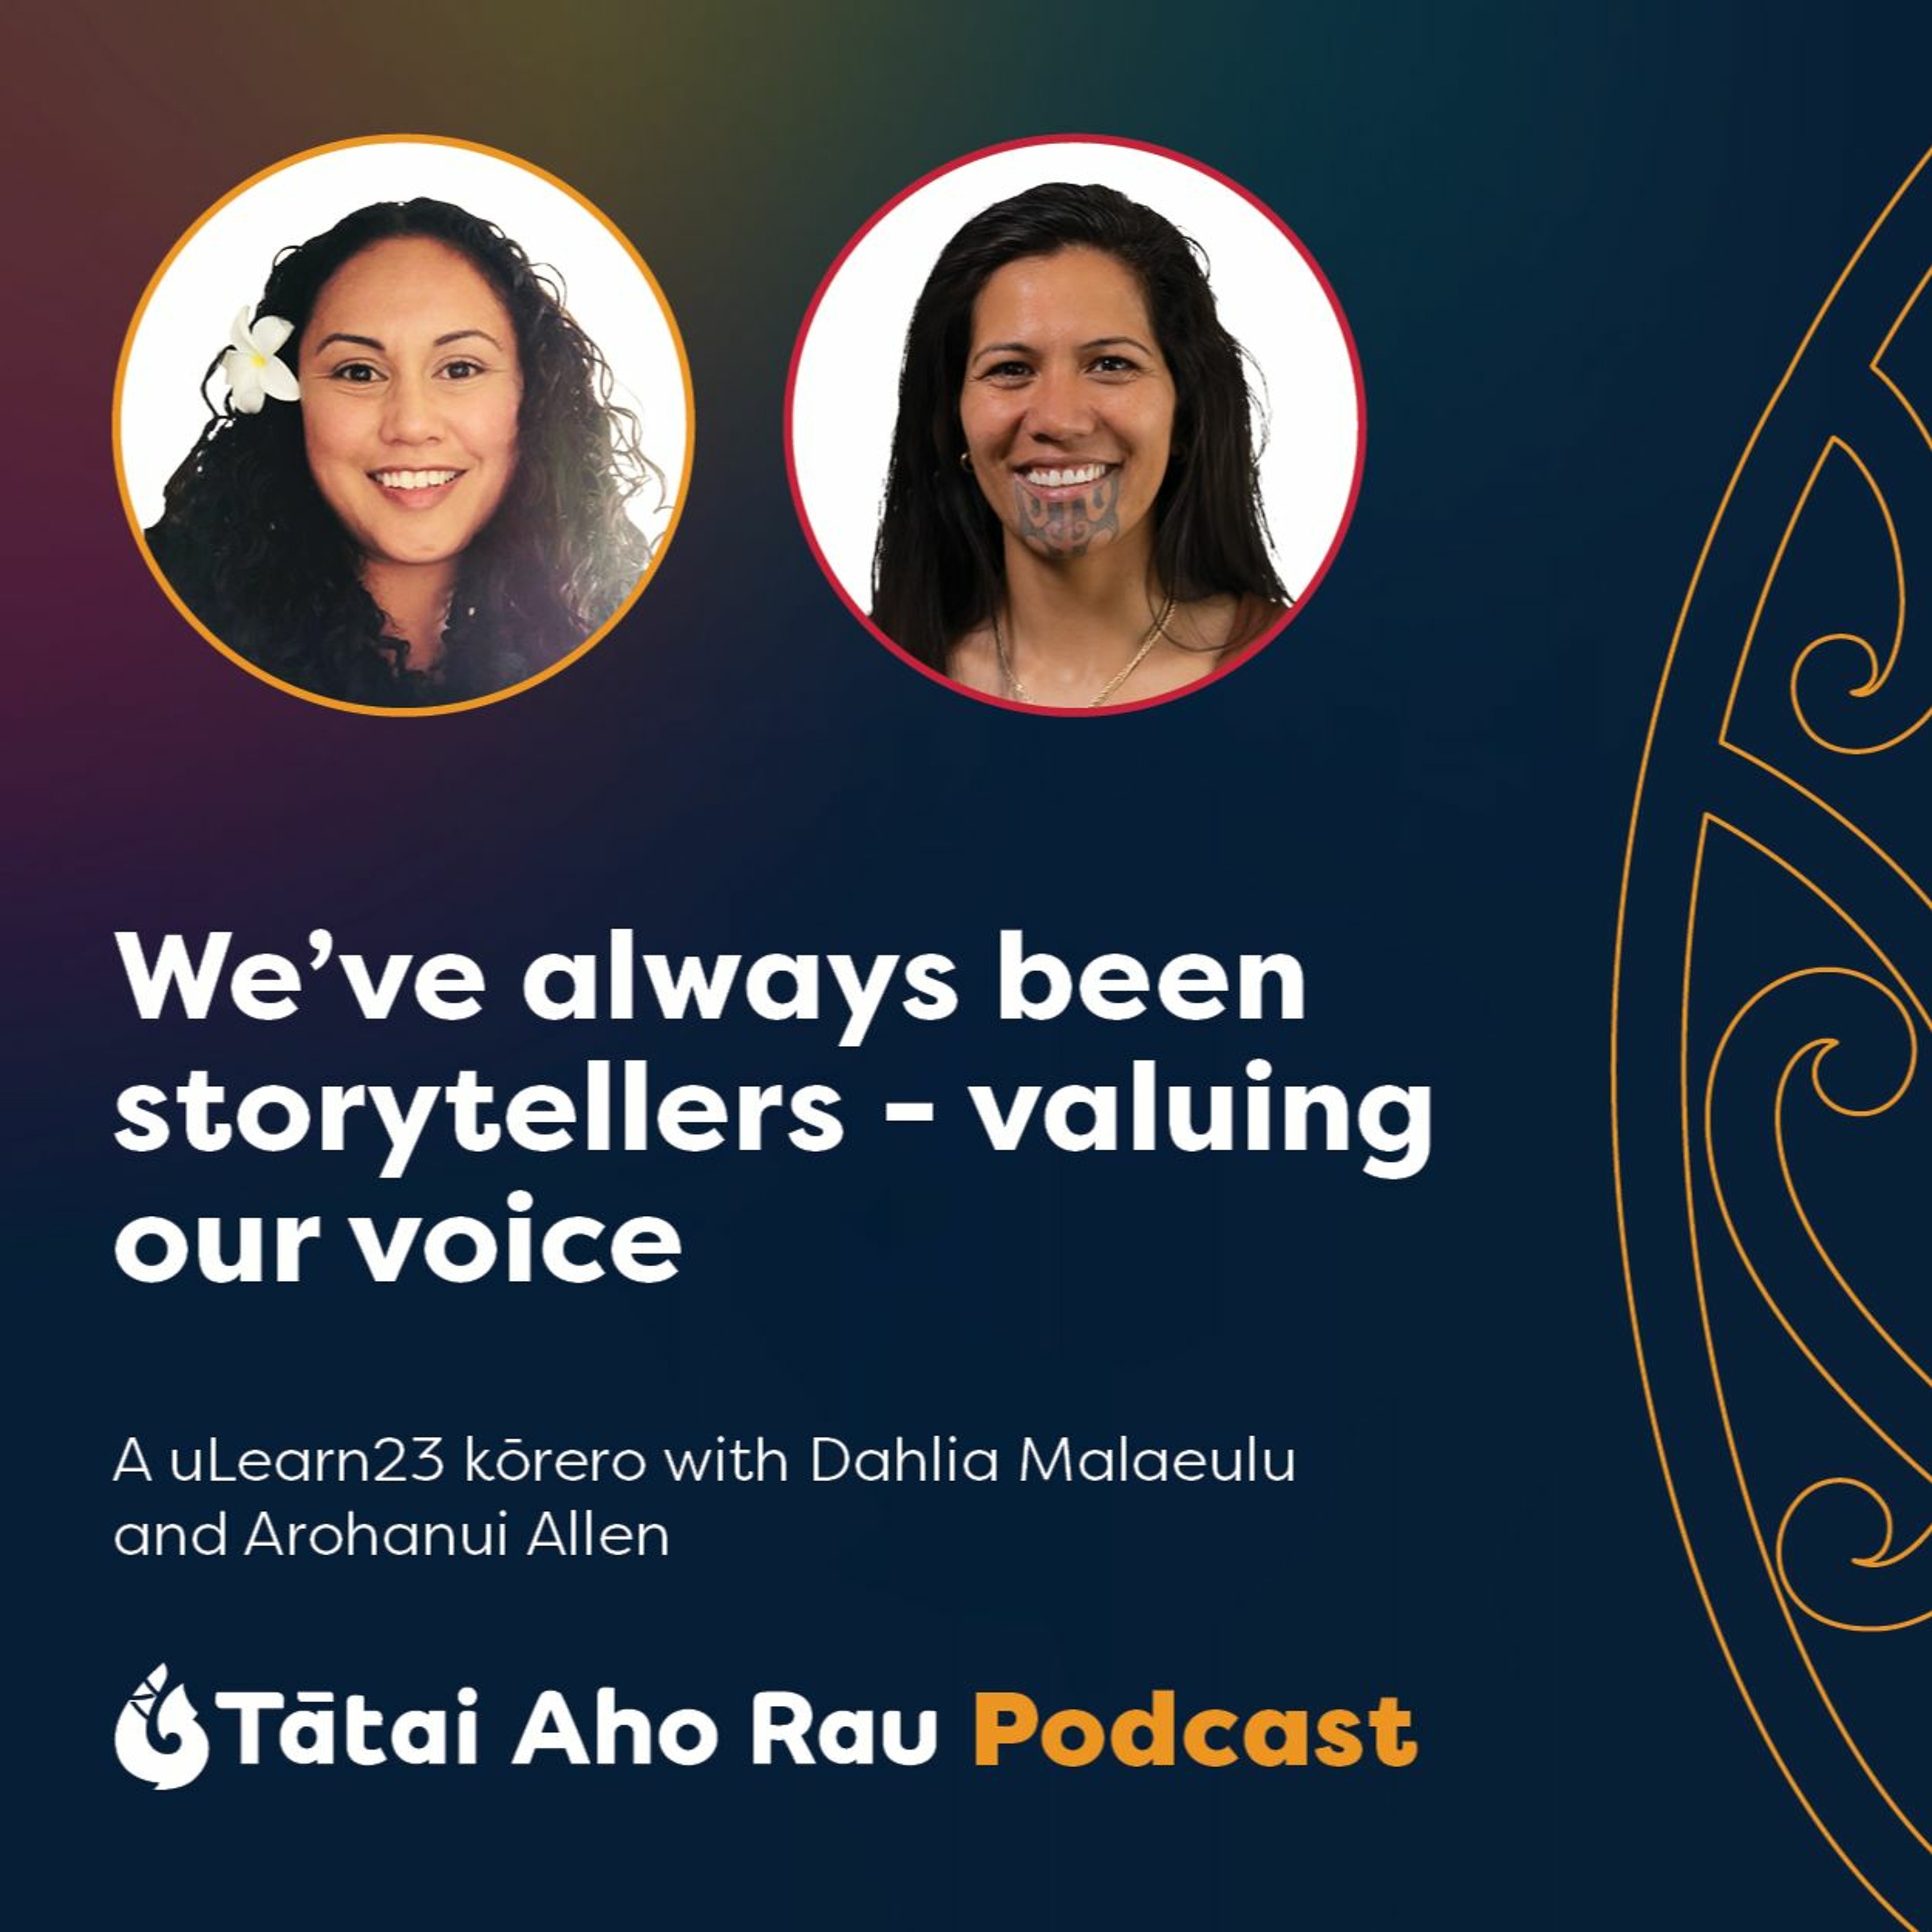 We've always been storytellers - valuing our voice. -Dahlia Malaeulu and Arohanui Allen